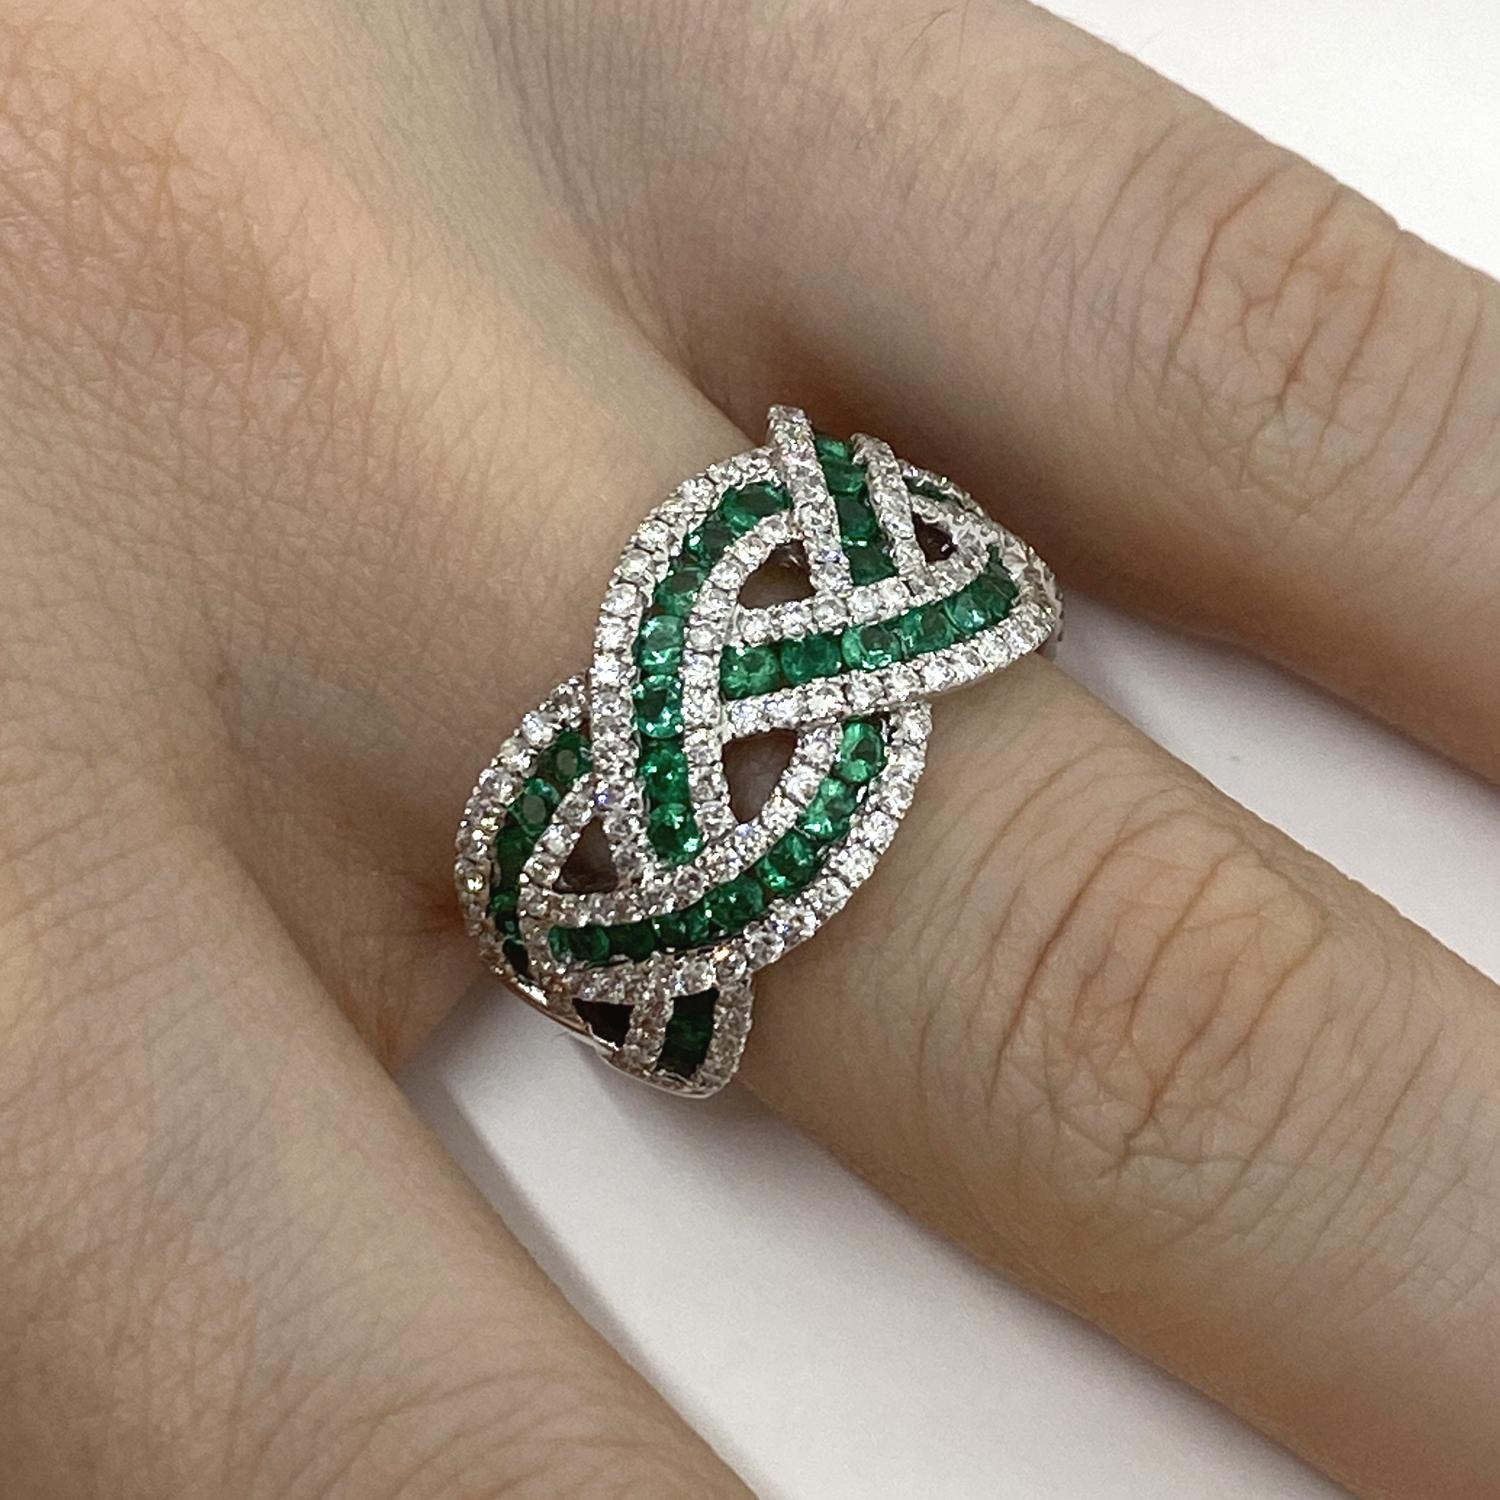 Band ring made of 18kt white gold with natural brilliant-cut emeralds for ct.1.85 and natural white diamonds for ct .1.08

Welcome to our Italian jewelry store, which has been in operation for over 100 years. Our passion for the art of jewelry has